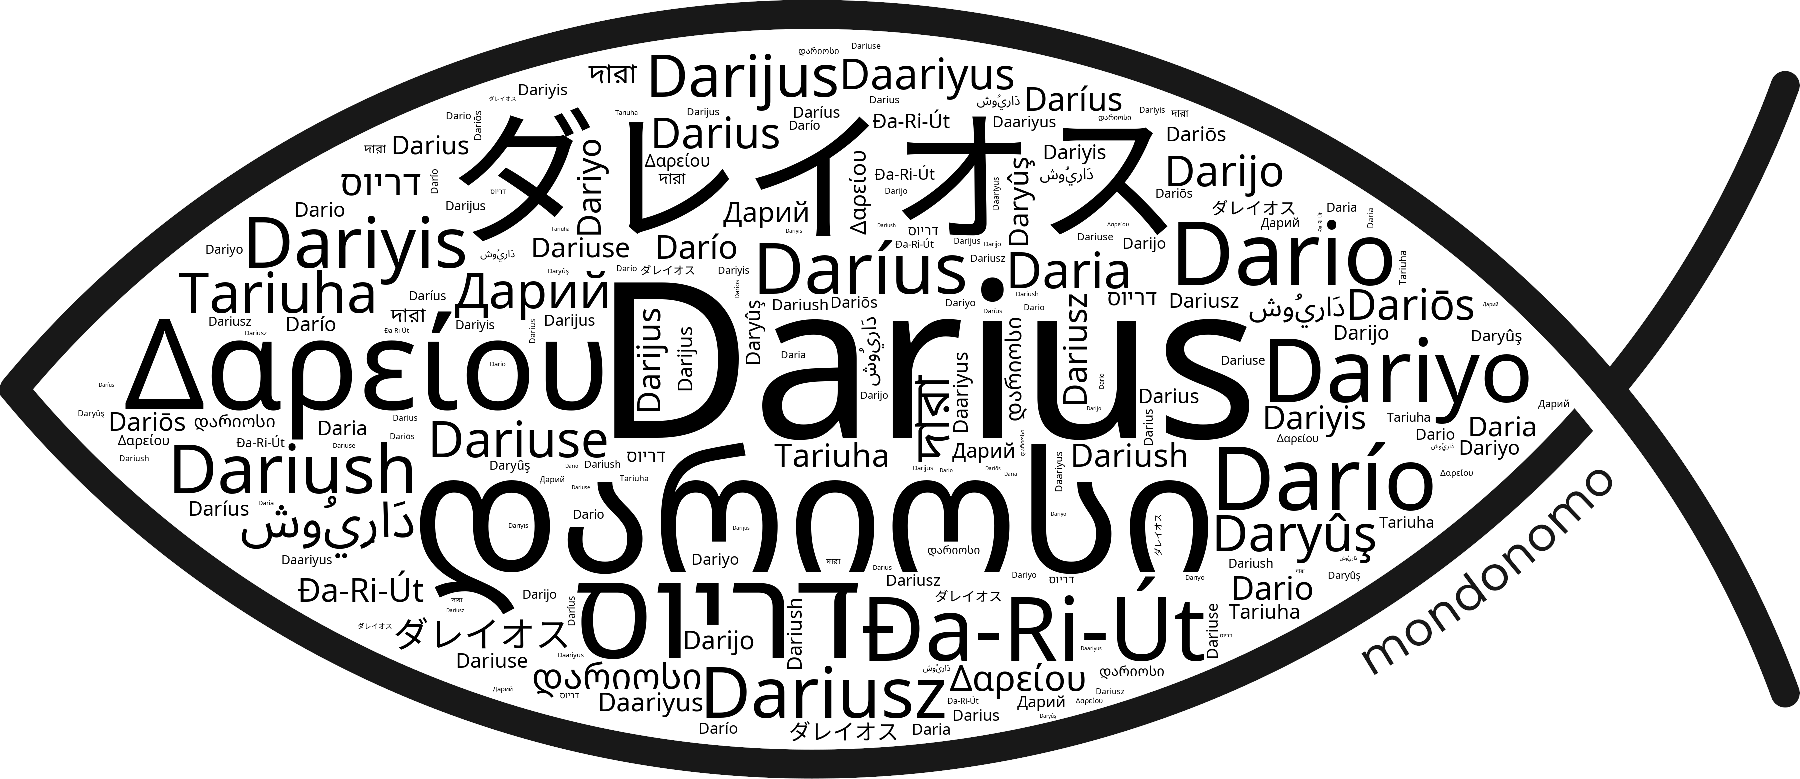 Name Darius in the world's Bibles